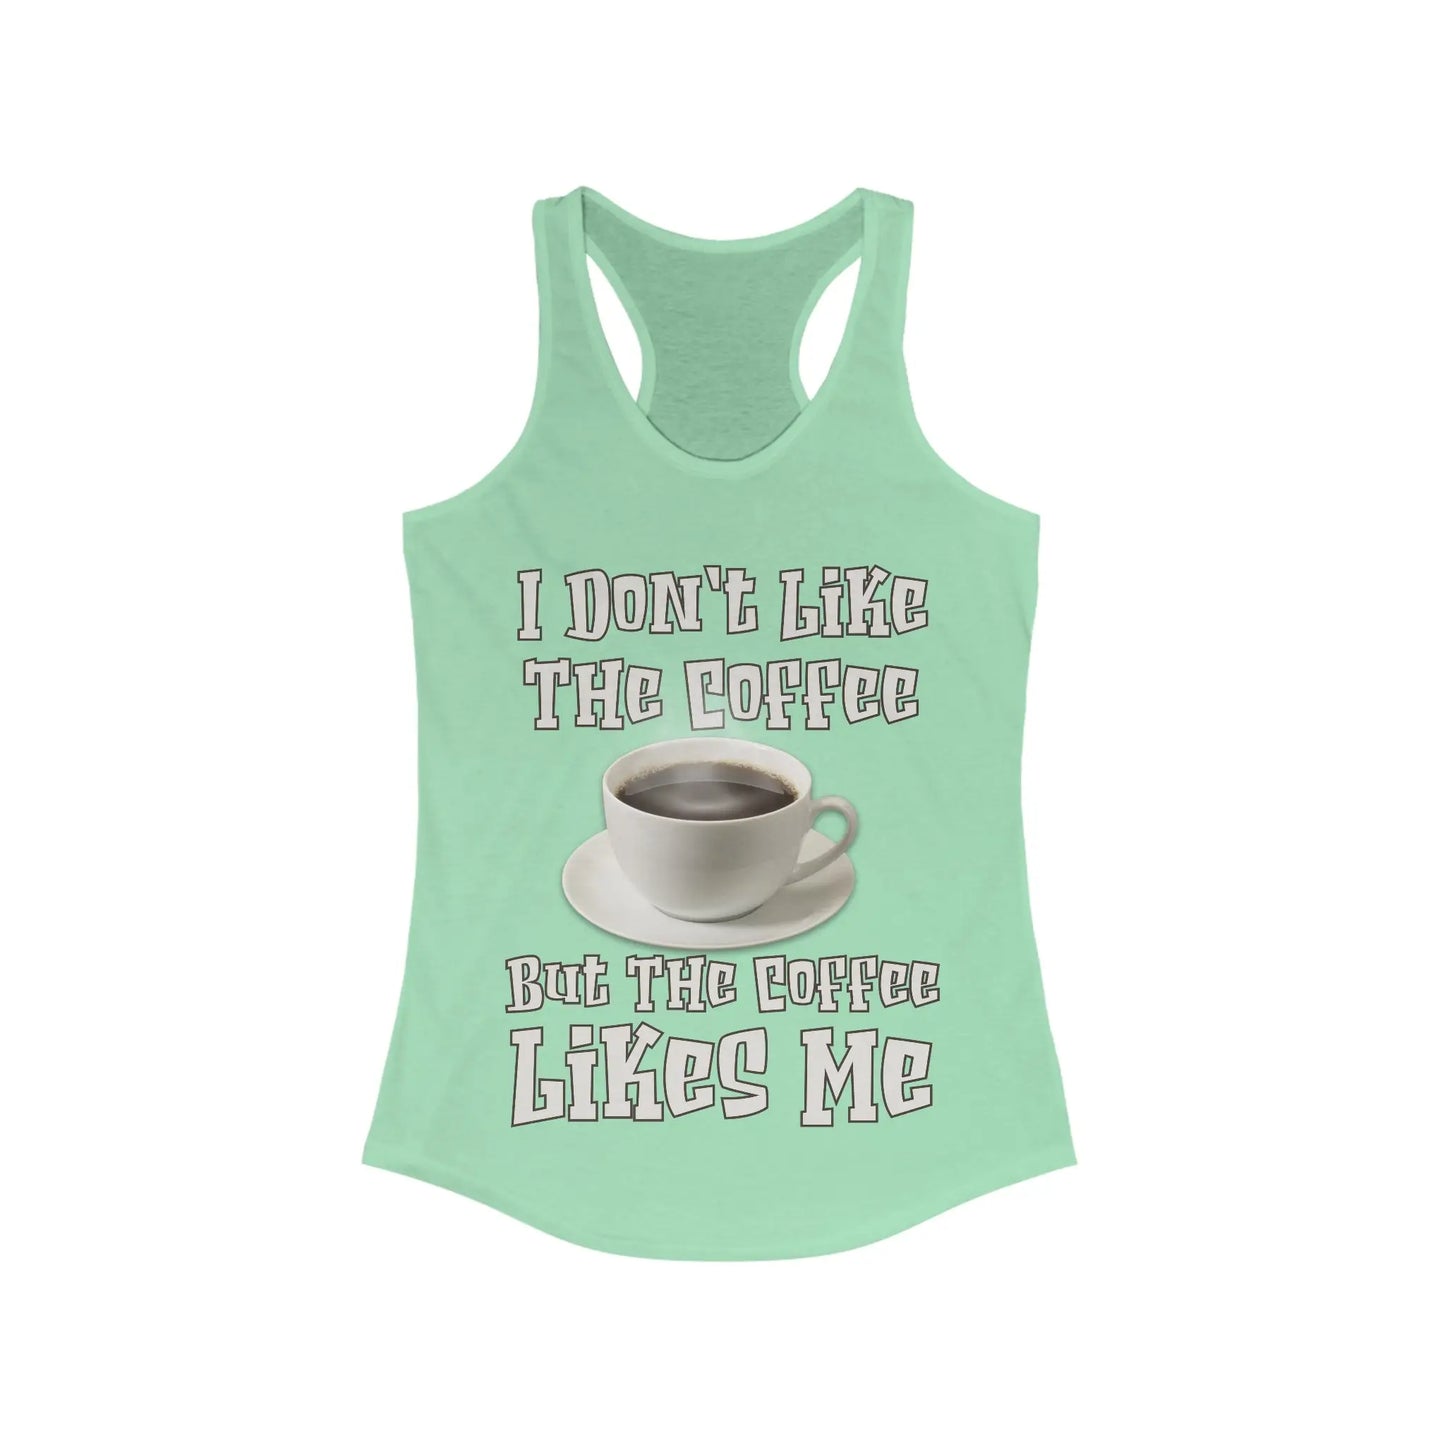 I Don't Like The Coffee Women's Ideal Racerback Tank - Wicked Tees